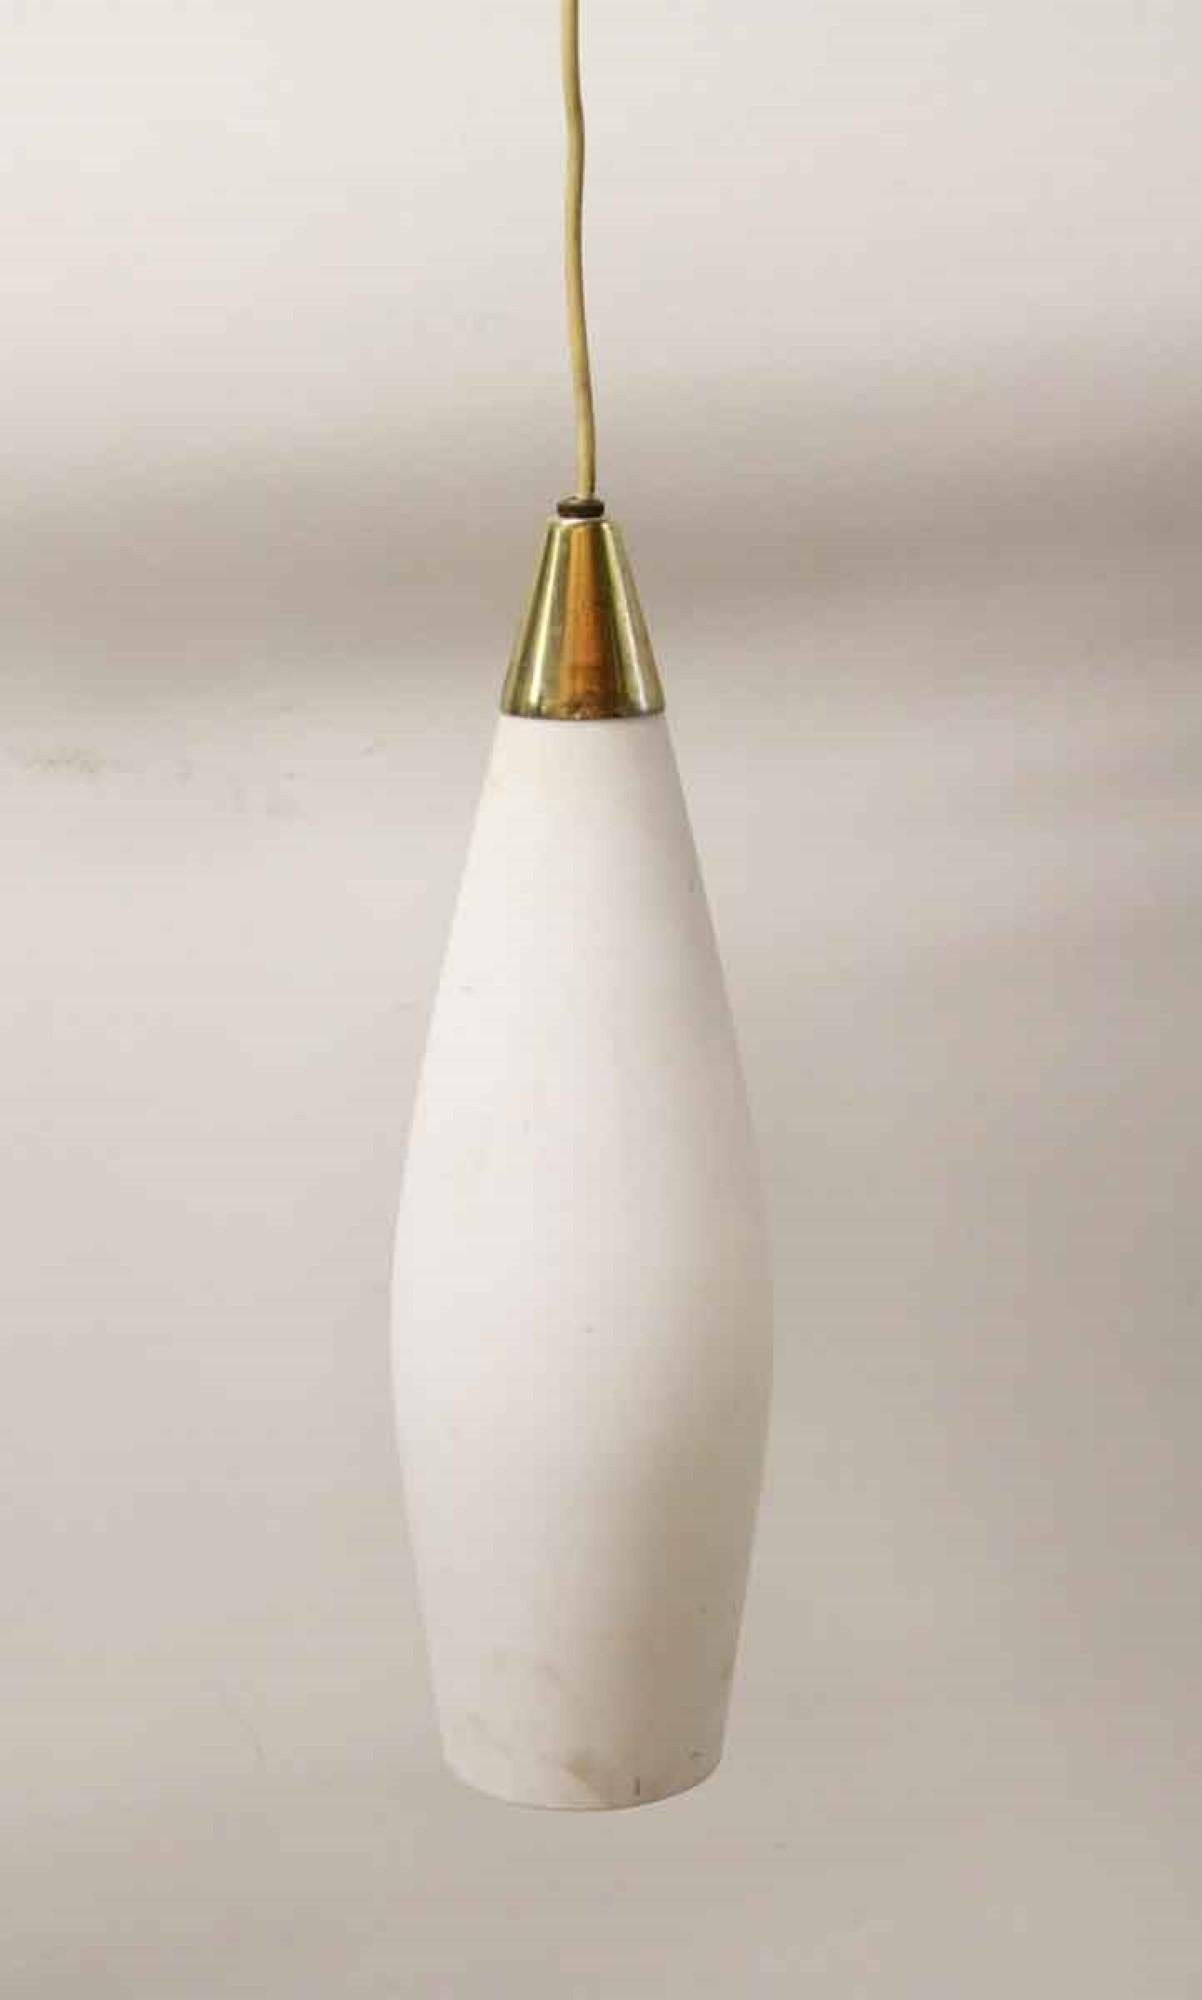 1970s simple Mid-Century Modern white glass pendant light. Some minor dark staining on shade. Please check photos. This can be seen at our 400 Gilligan St location in Scranton. PA.